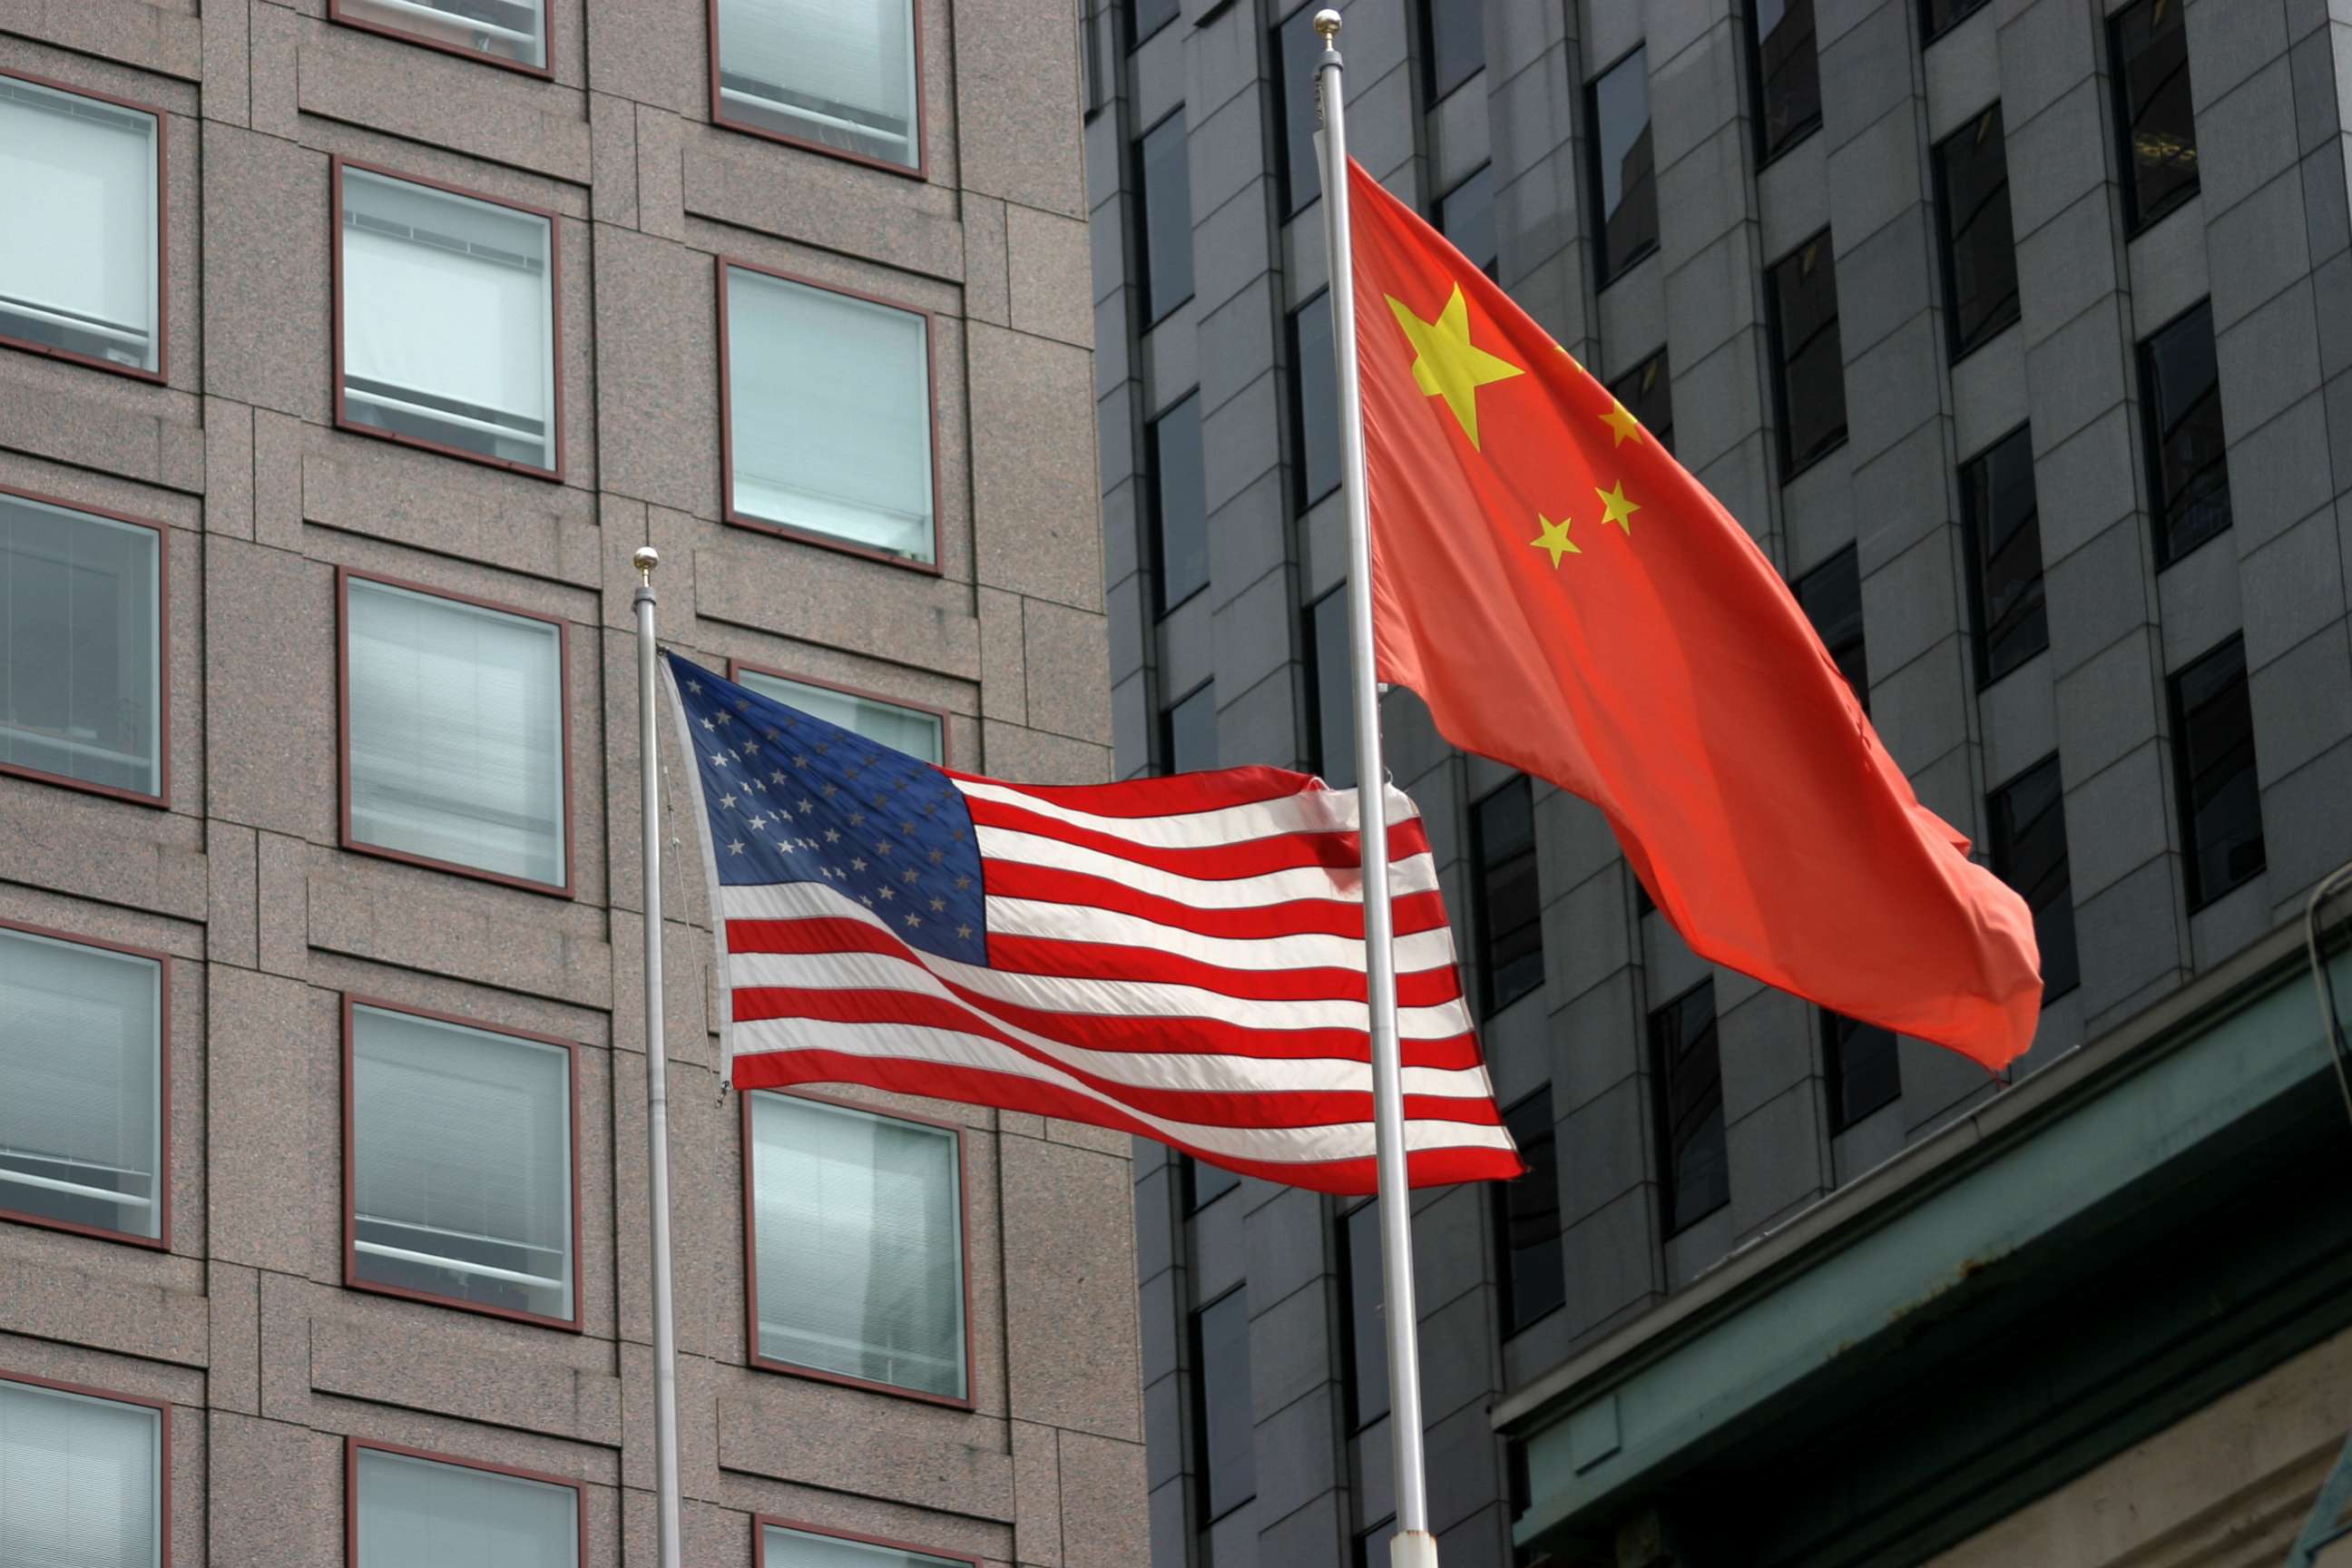 PHOTO: The U.S. flag and the national flag of the People's Republic of China are seen in this stock photo.